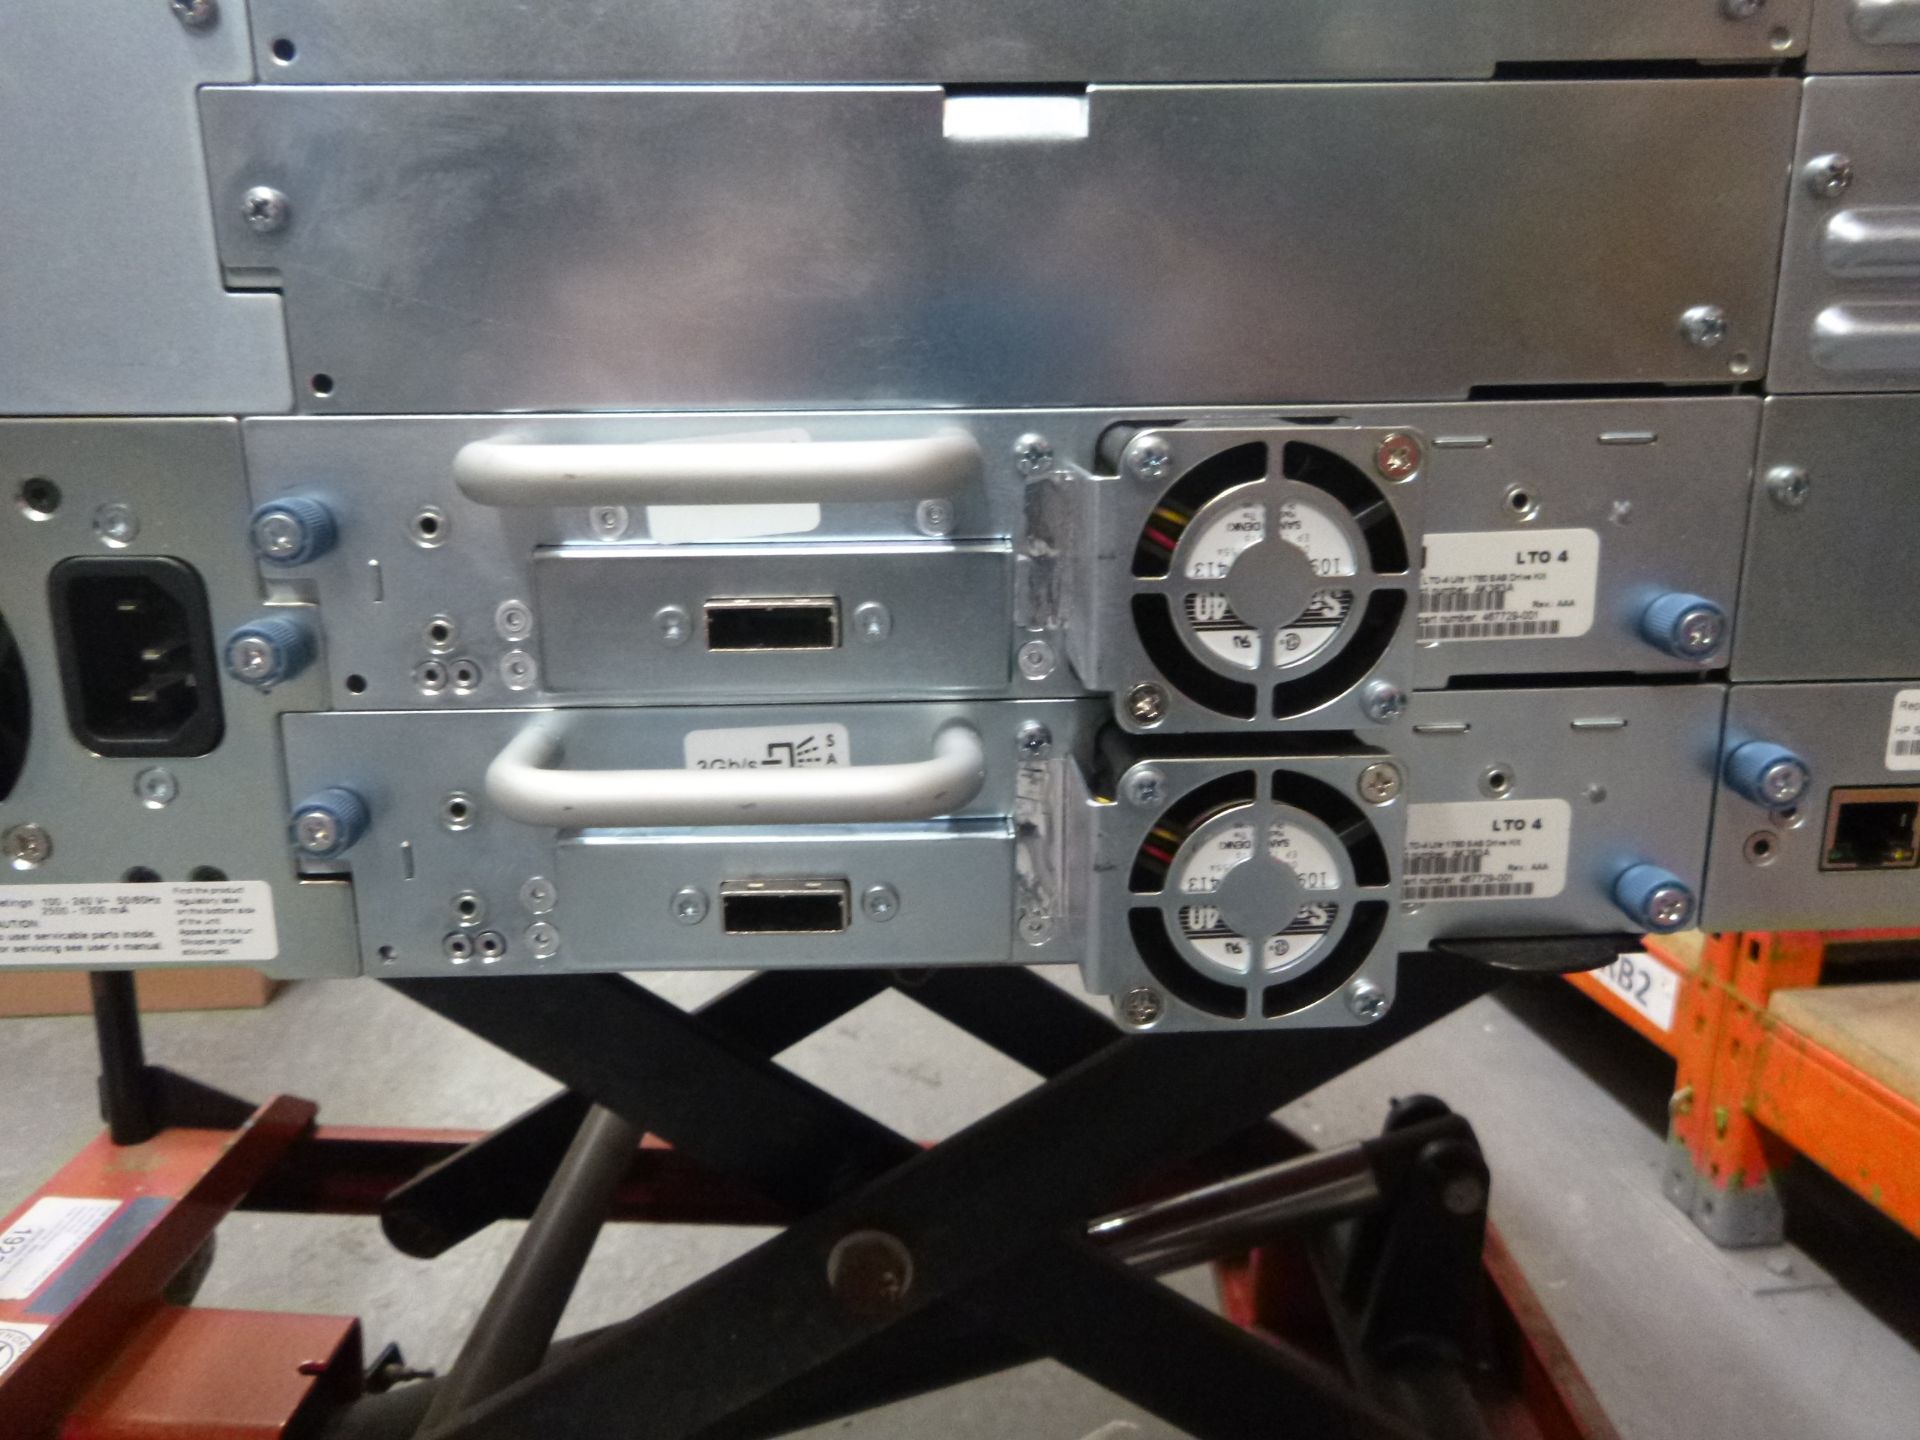 HP STORAGEWORKS MSL4048 4U RACKMOUNT TAPE LIBRARY. WITH 2 X LTO4 TAPE DRIVES. - Image 3 of 3